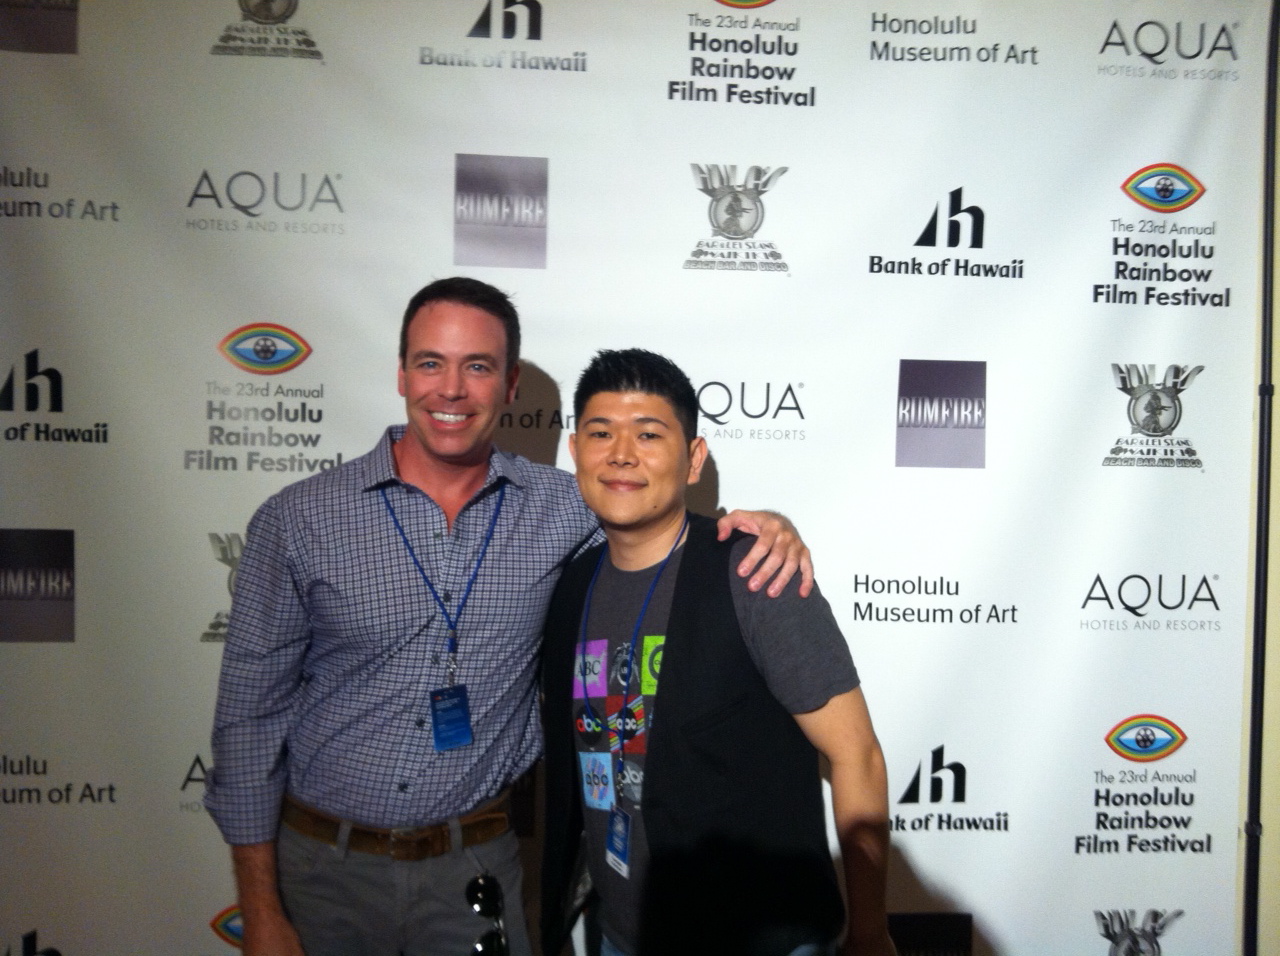 Stephen Soucy and Brent Anbe at the Honolulu Rainbow Film Festival, 2012.